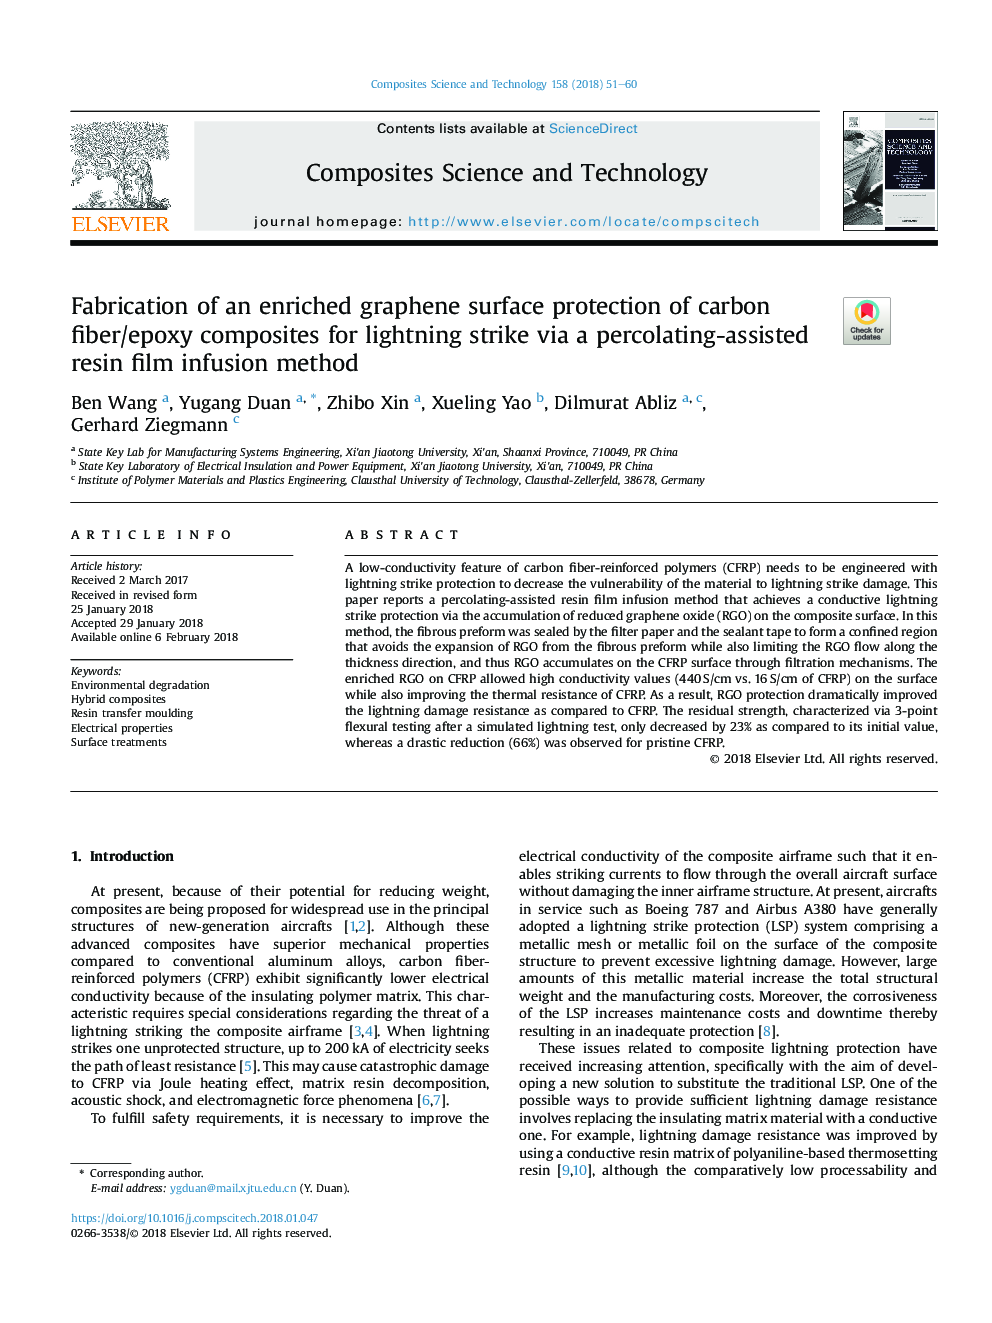 Fabrication of an enriched graphene surface protection of carbon fiber/epoxy composites for lightning strike via a percolating-assisted resin film infusion method